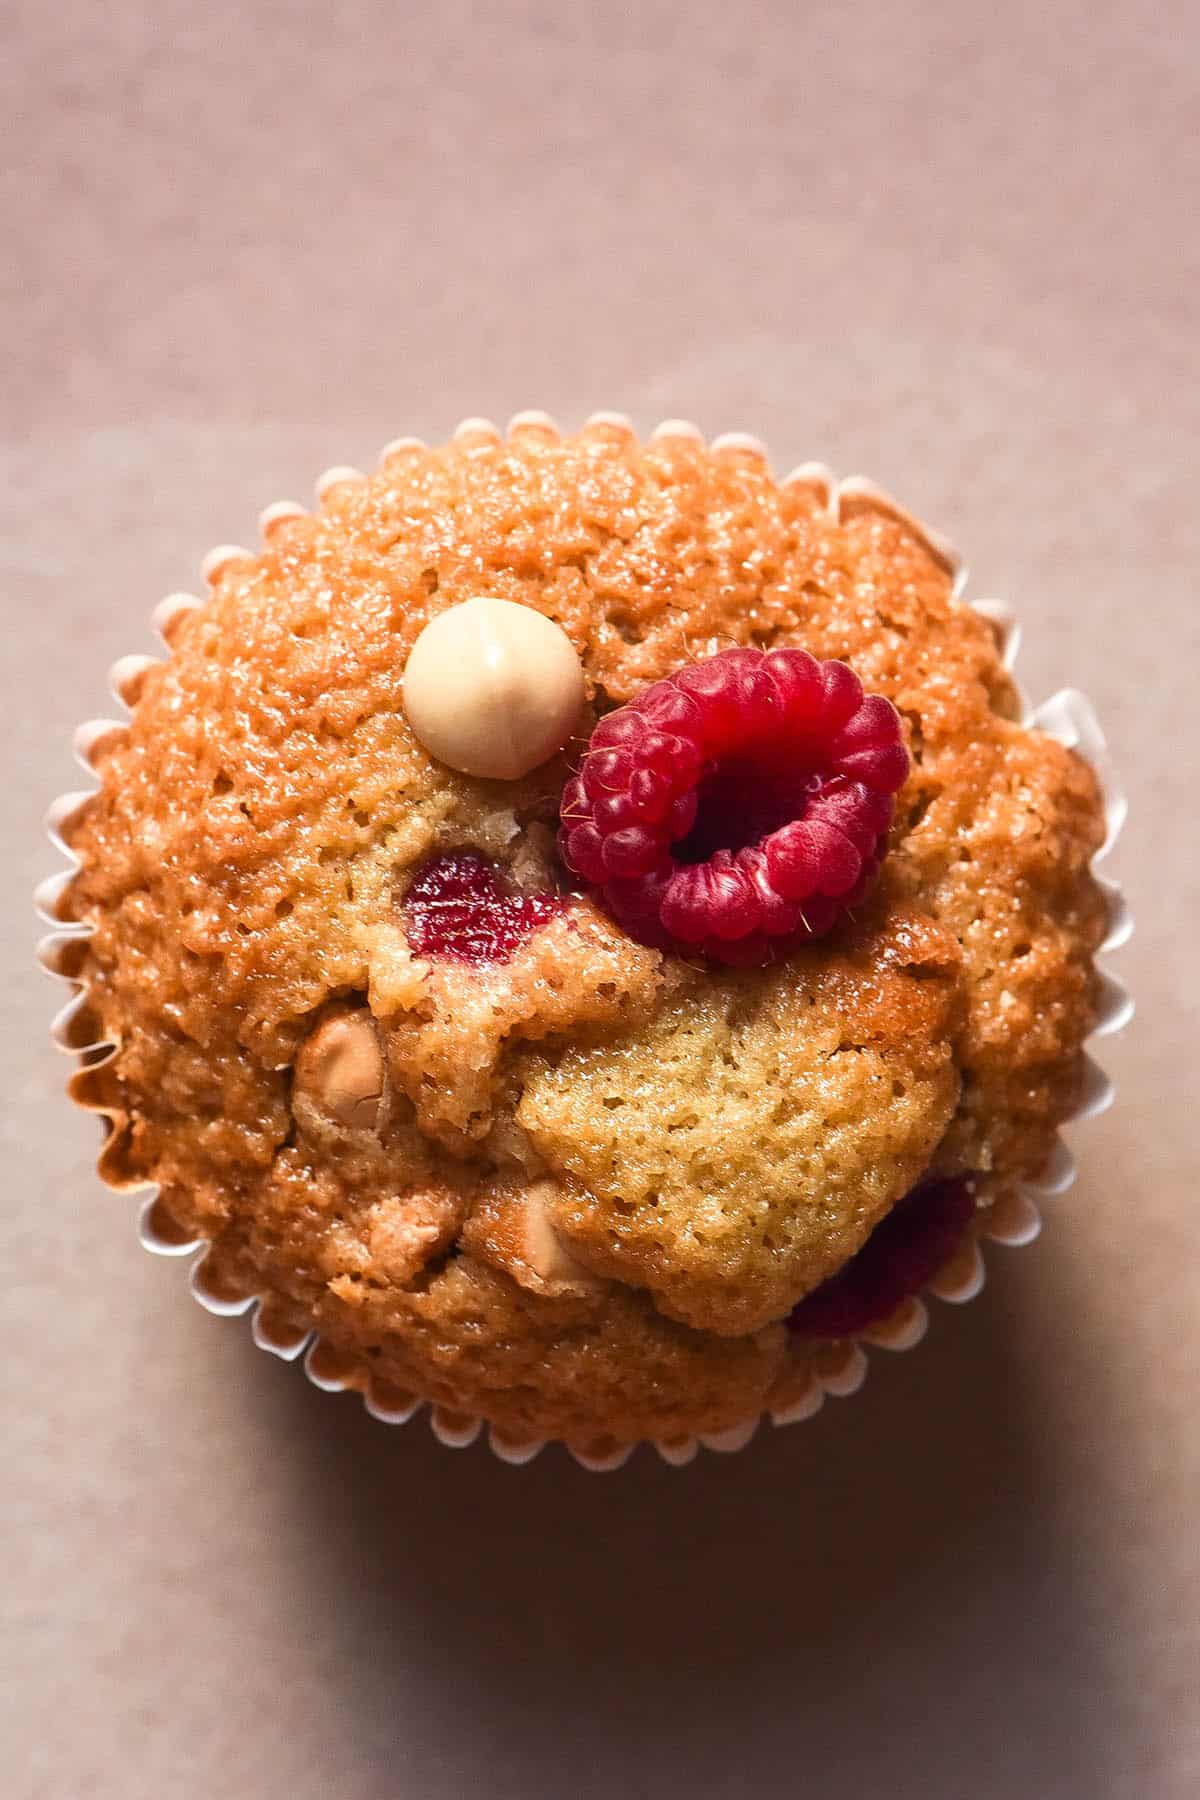 An aerial close up view of a gluten free raspberry muffin on a pale pink ceramic plate. The muffin is topped with a fresh raspberry and white chocolate chip